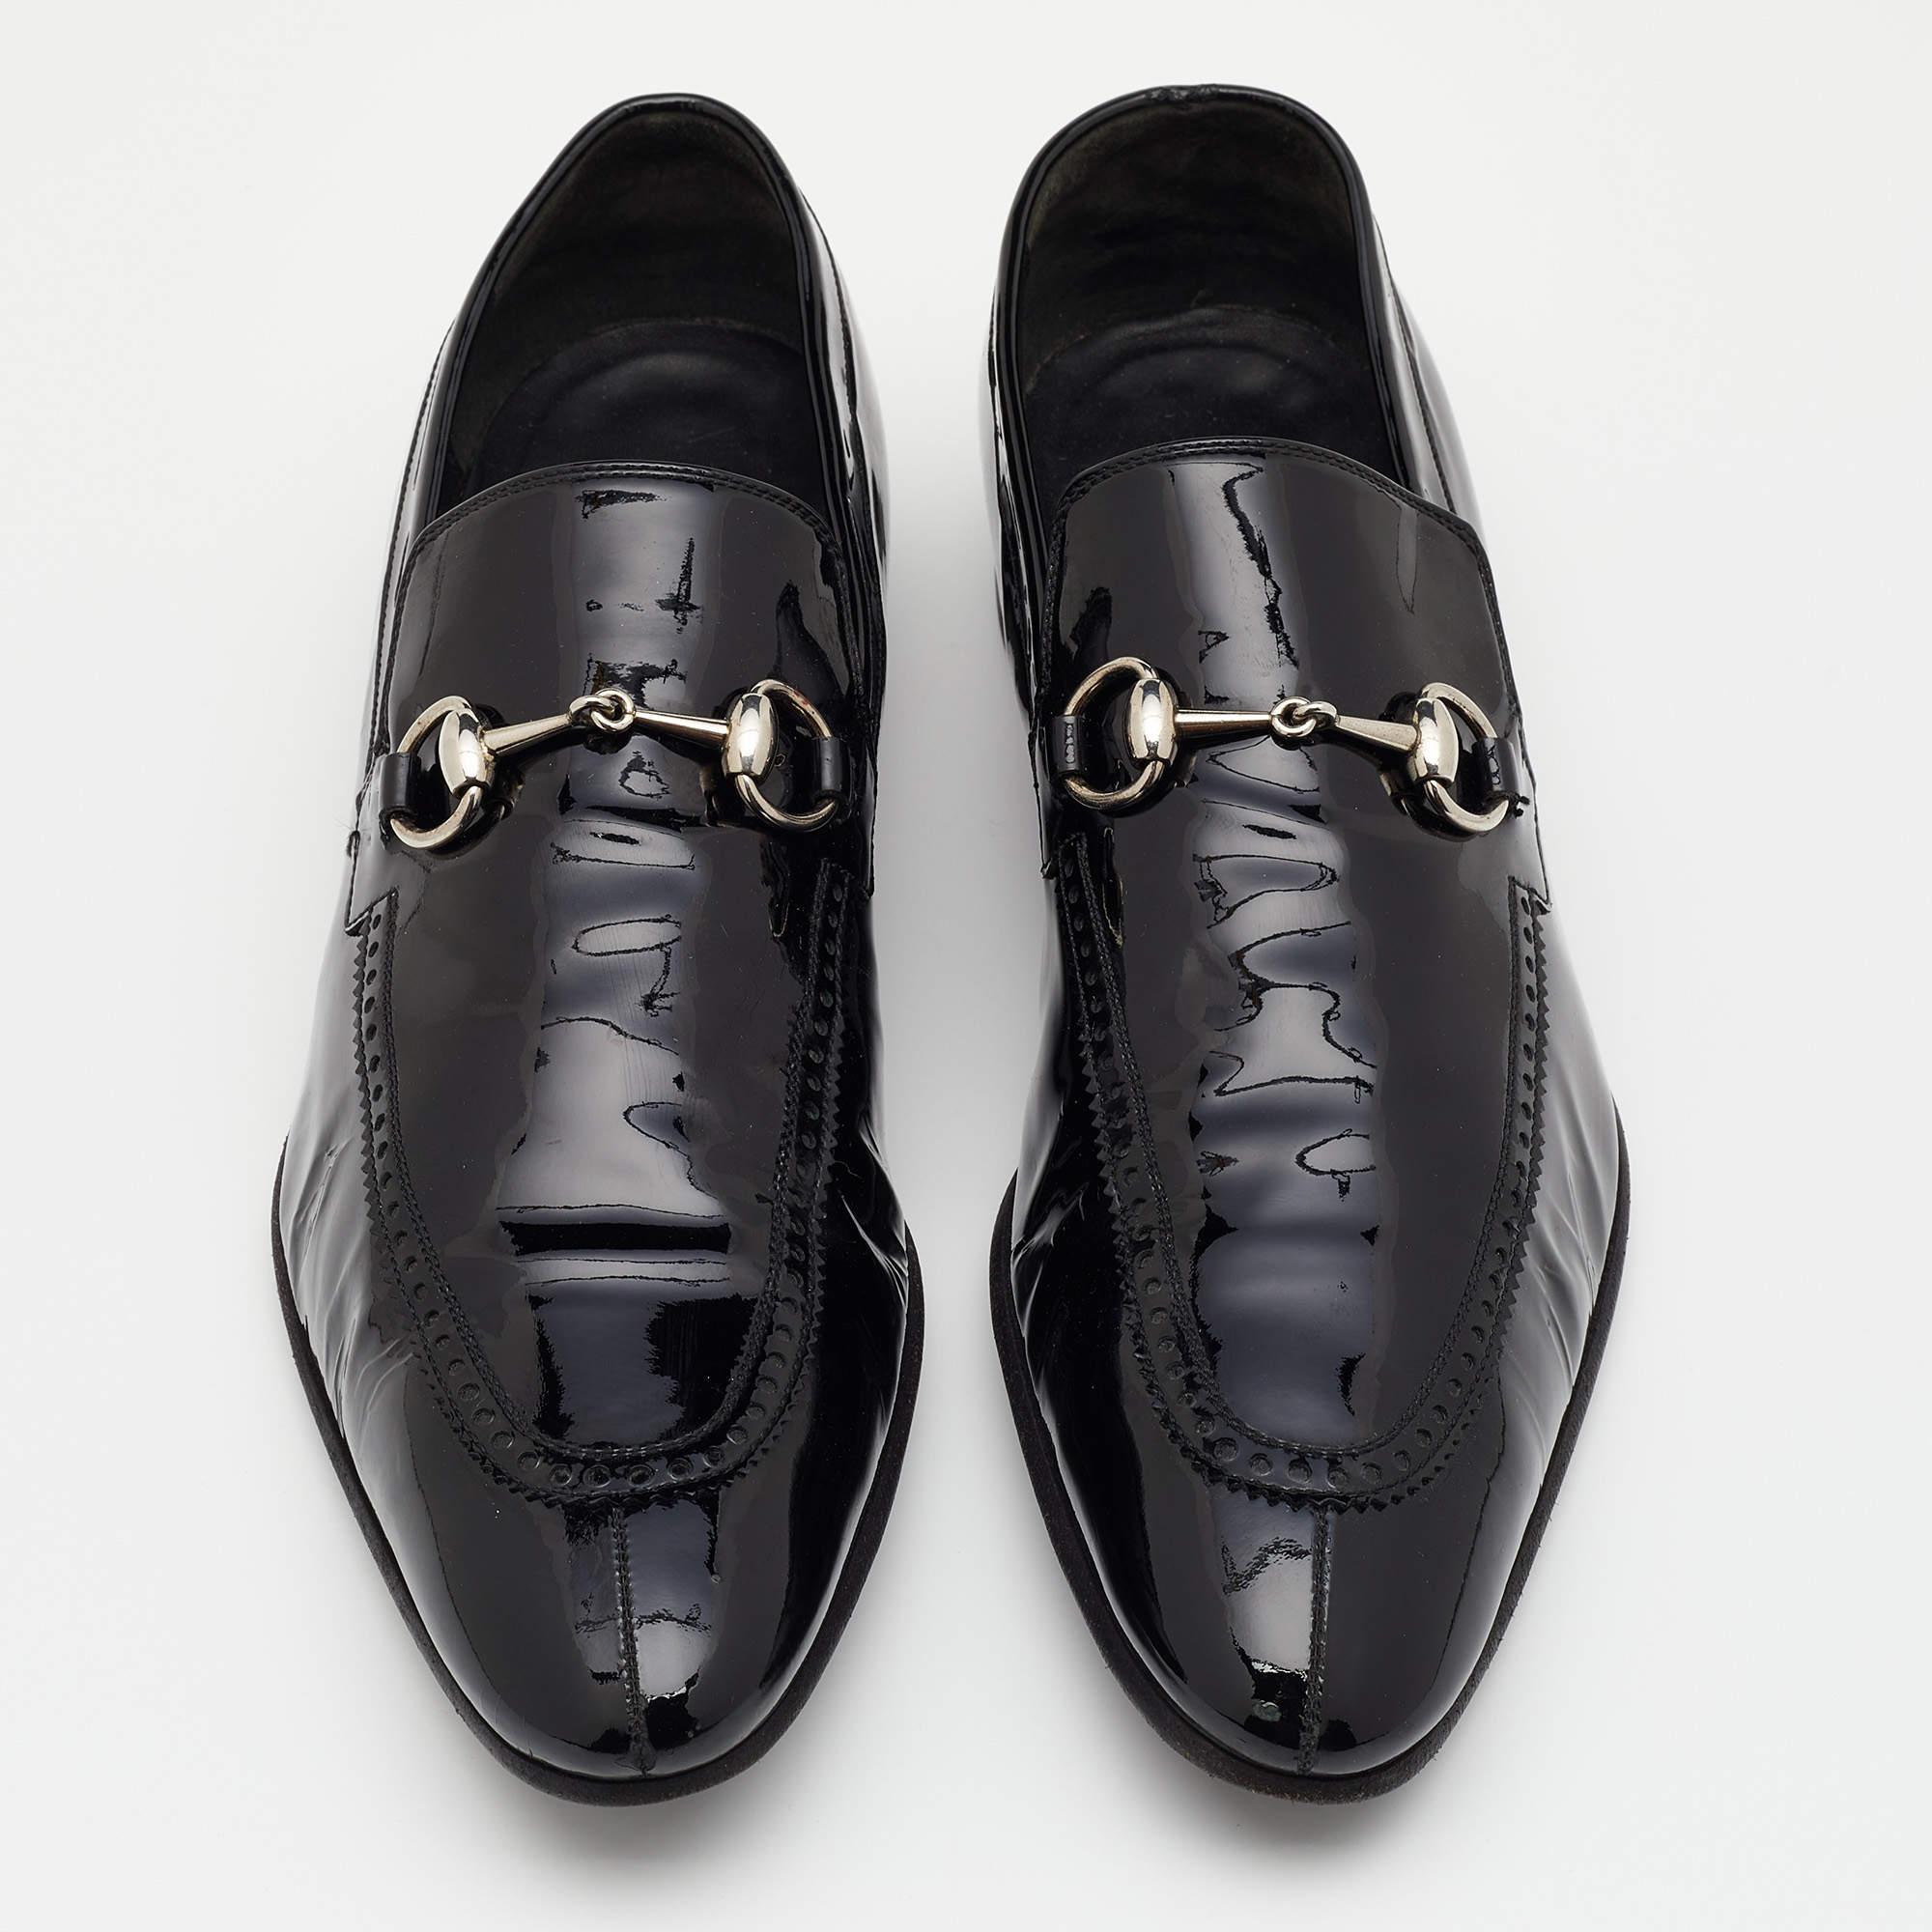 Gucci Black Patent Leather Horsebit Slip On Loafers Size 44 3